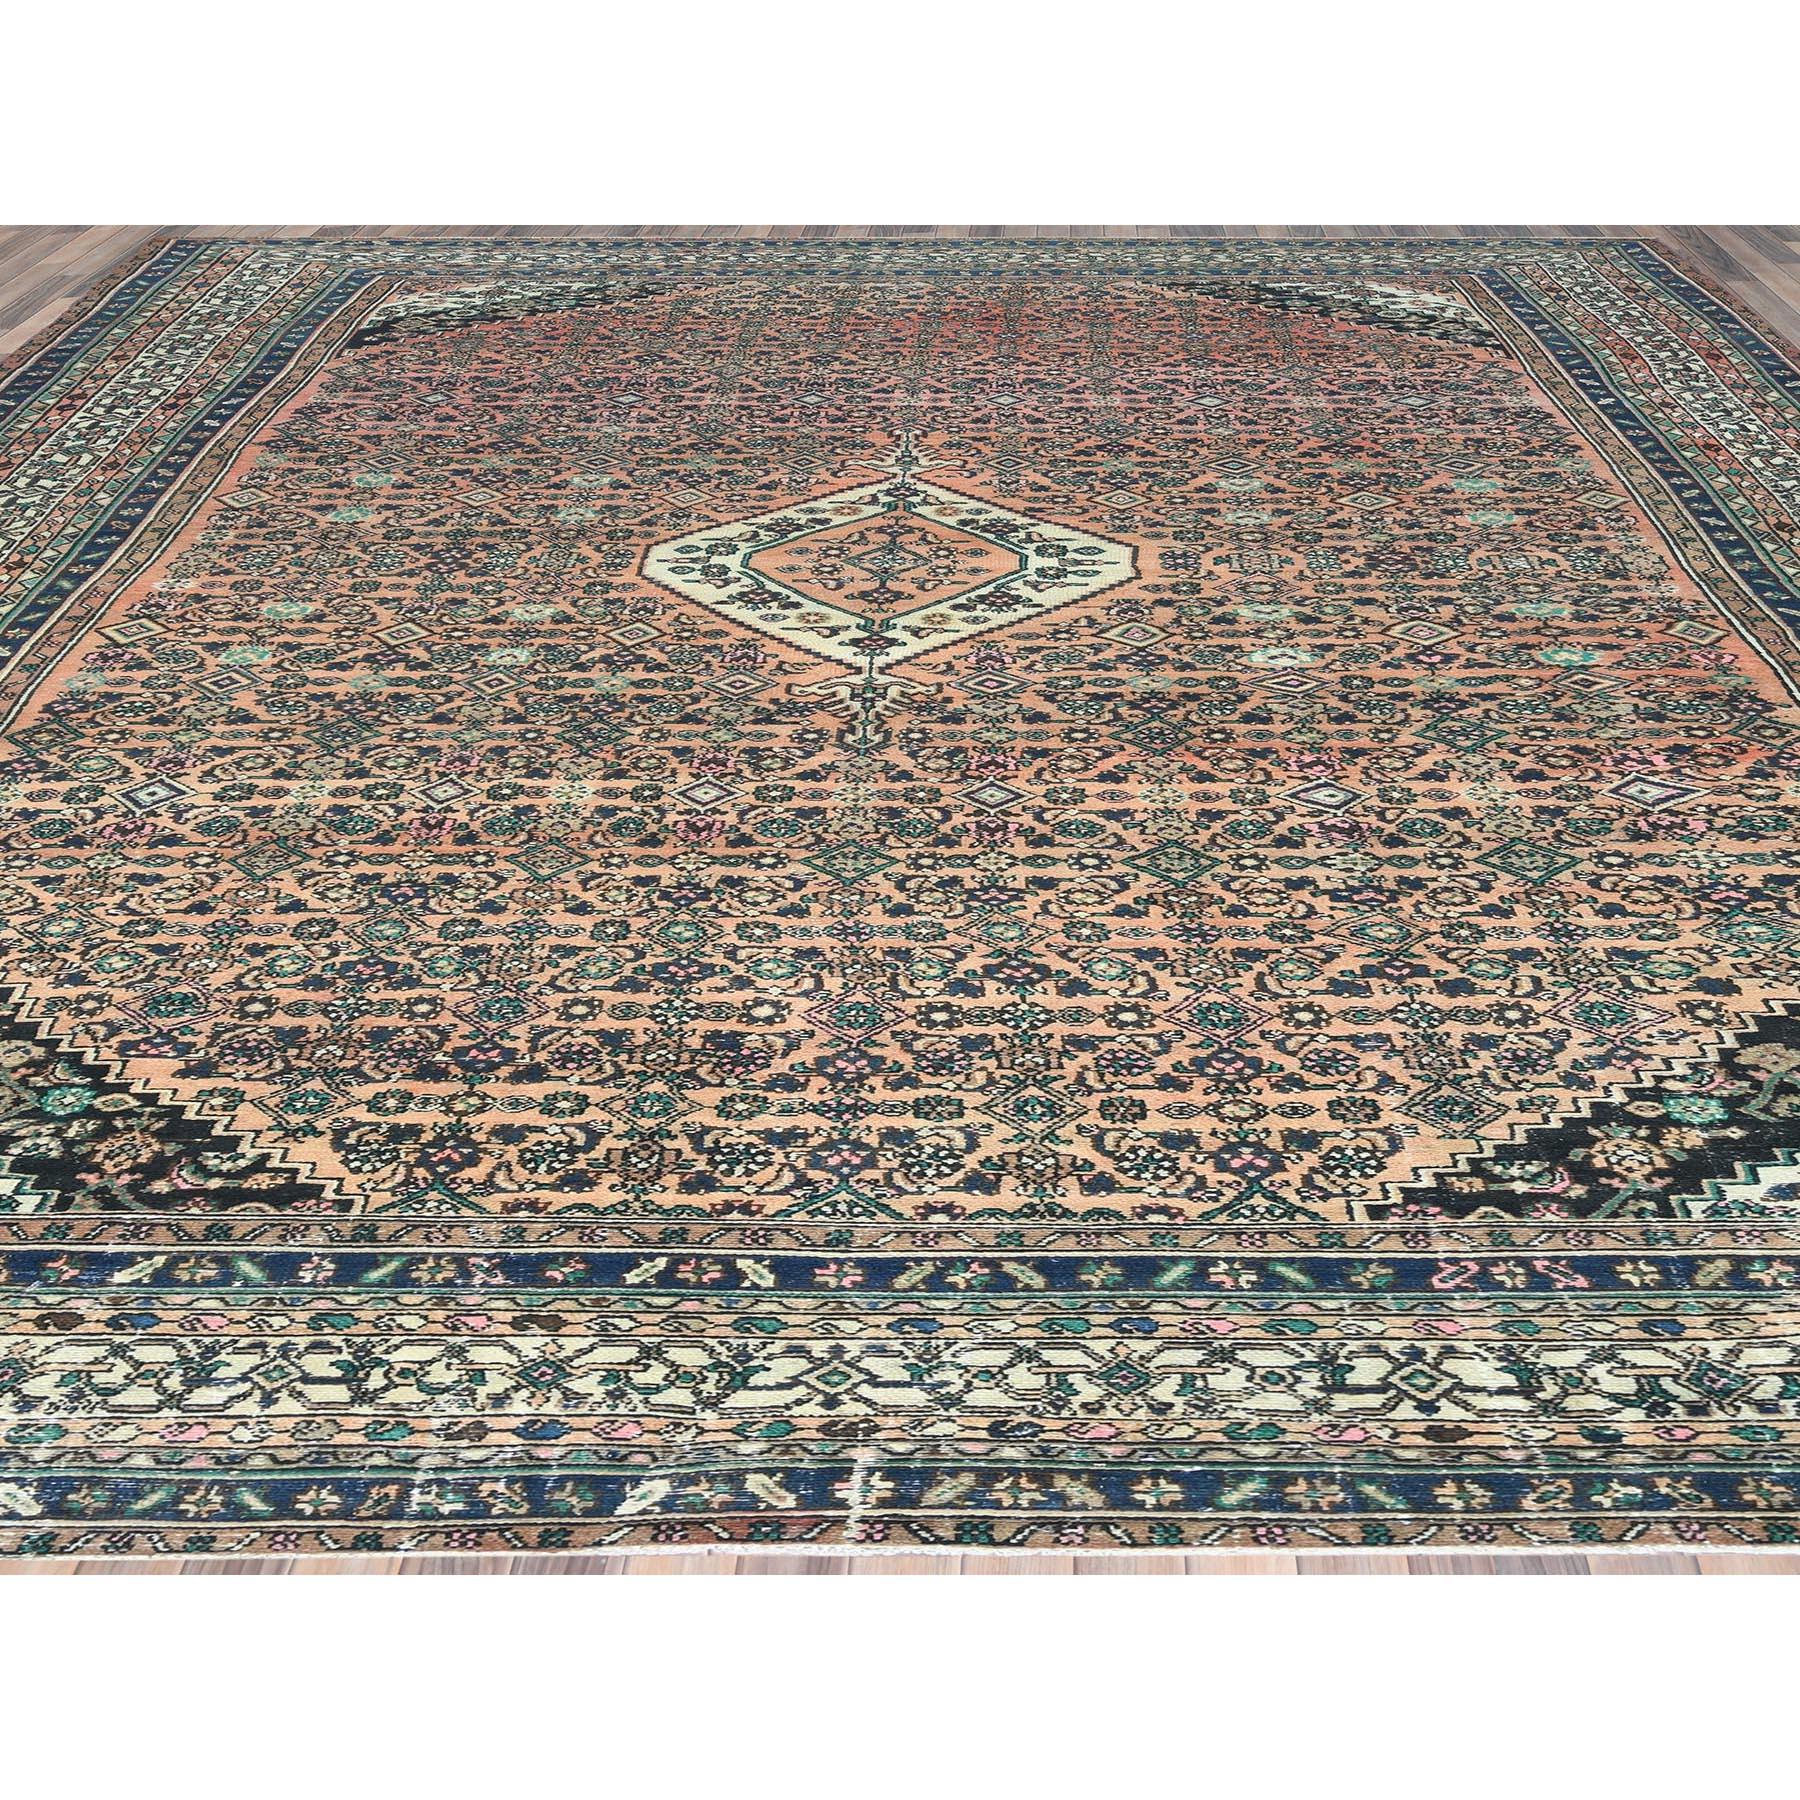 Medieval Salmon Color Old Persian Bibikabad All Over Design Hand Knotted Pure Wool Rug For Sale